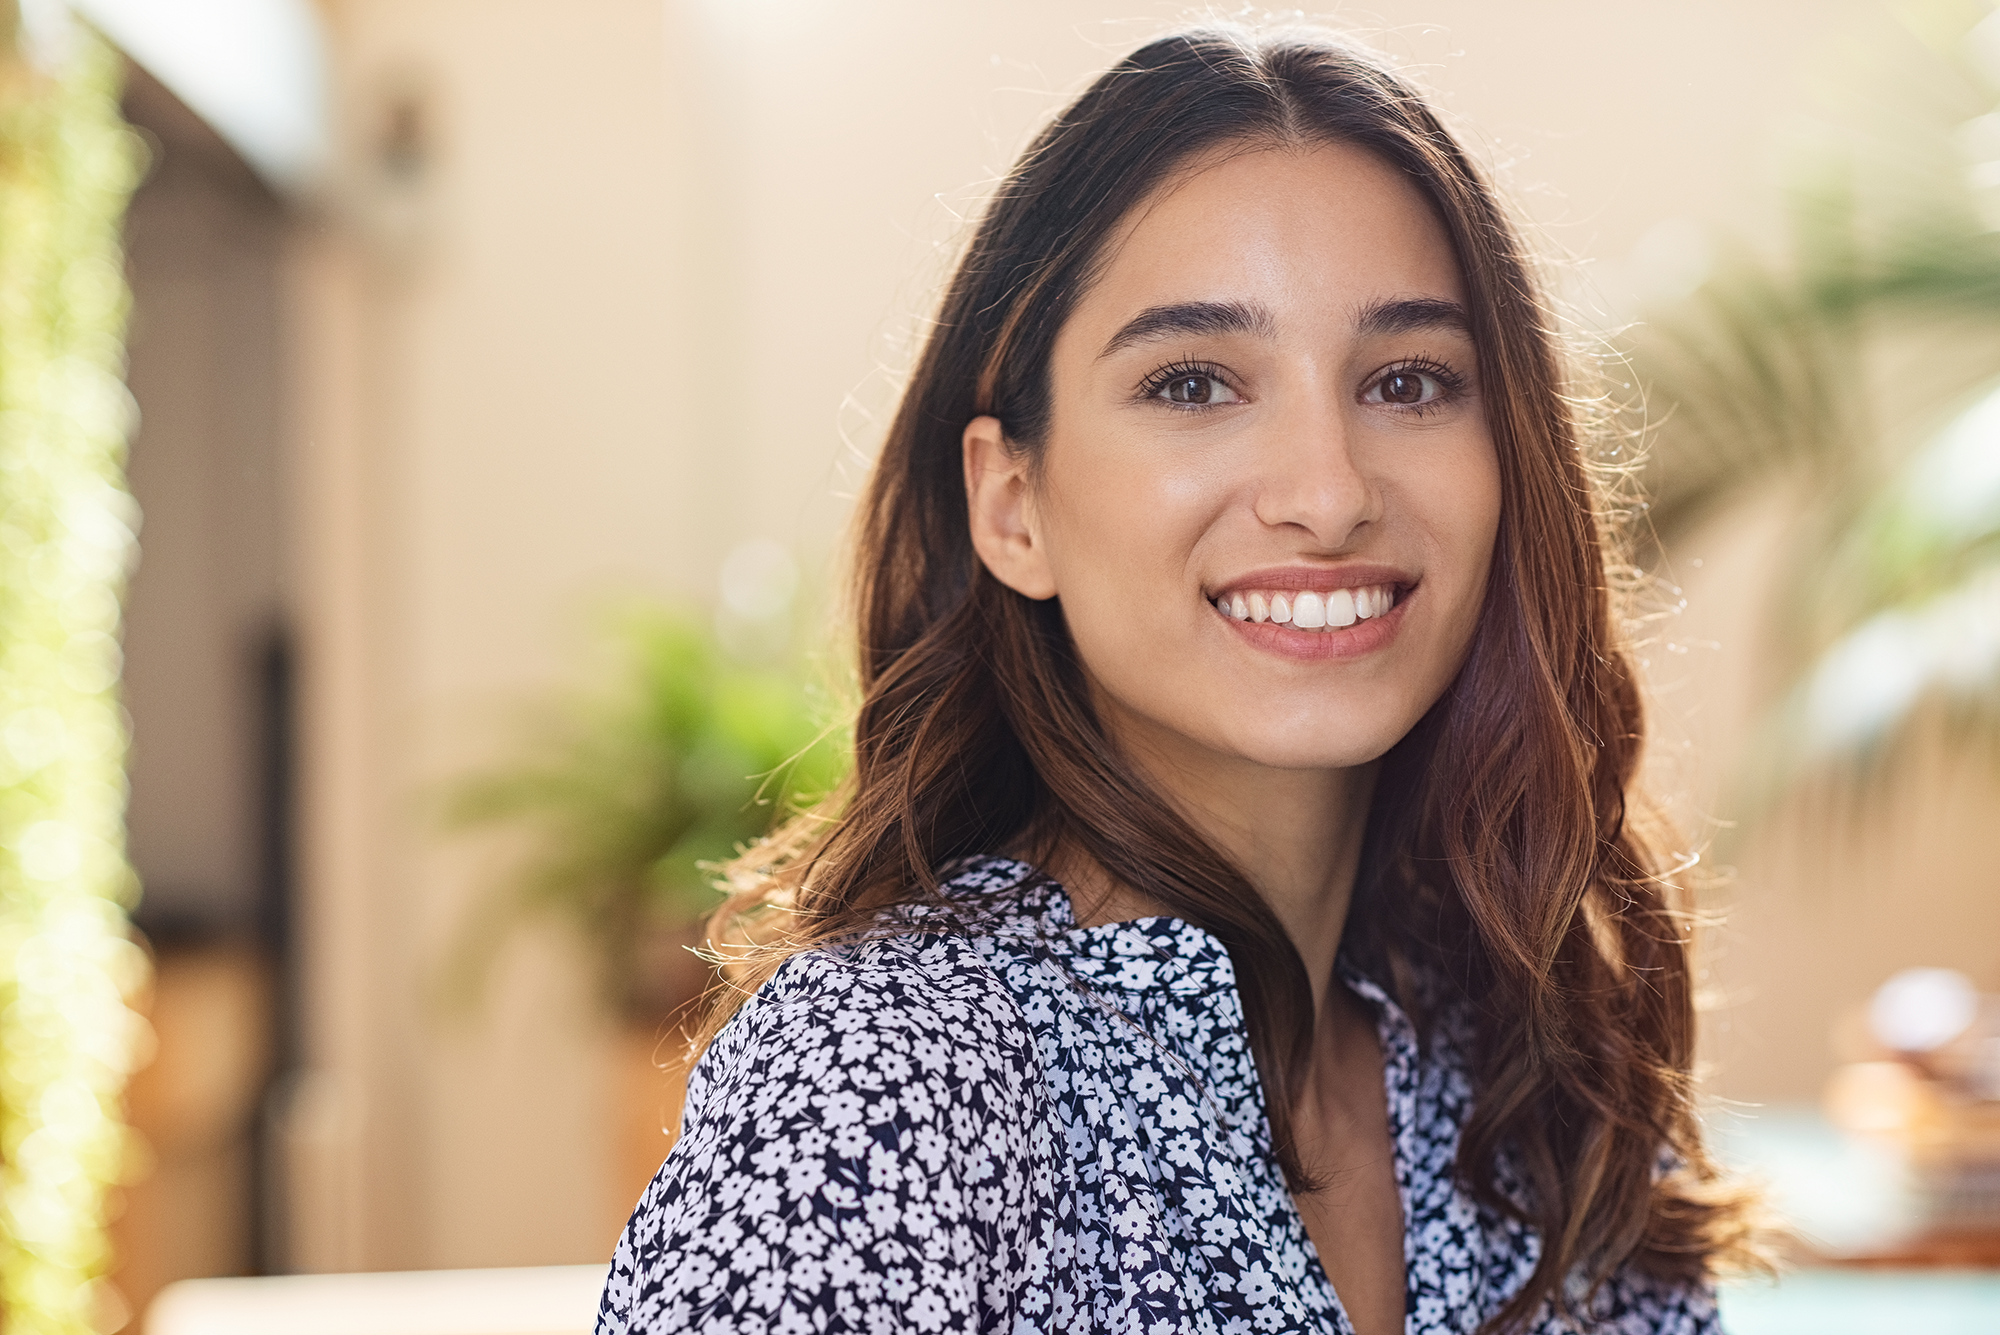 Everything You Need to Know About Dental Bridges in Seguin, Bella Vista Dental Bella Vista 4 Smiles dentist in Seguin Texas Dr. Lara Perry and Dr. Federico Gonzalez